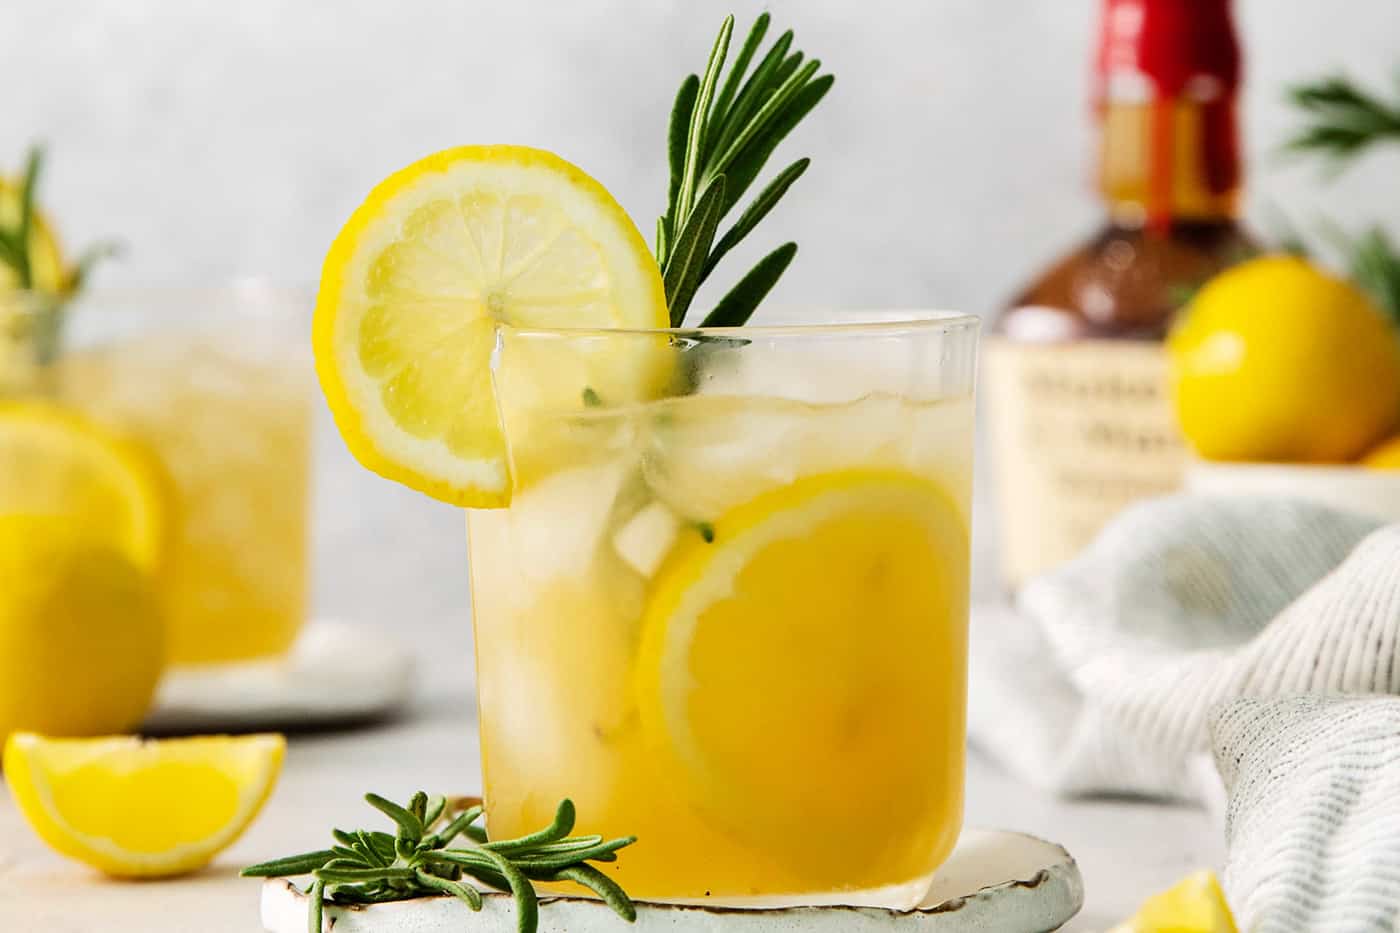 A glass of bourbon limoncello cocktail garnished with a lemon wheel and a sprig of fresh rosemary.